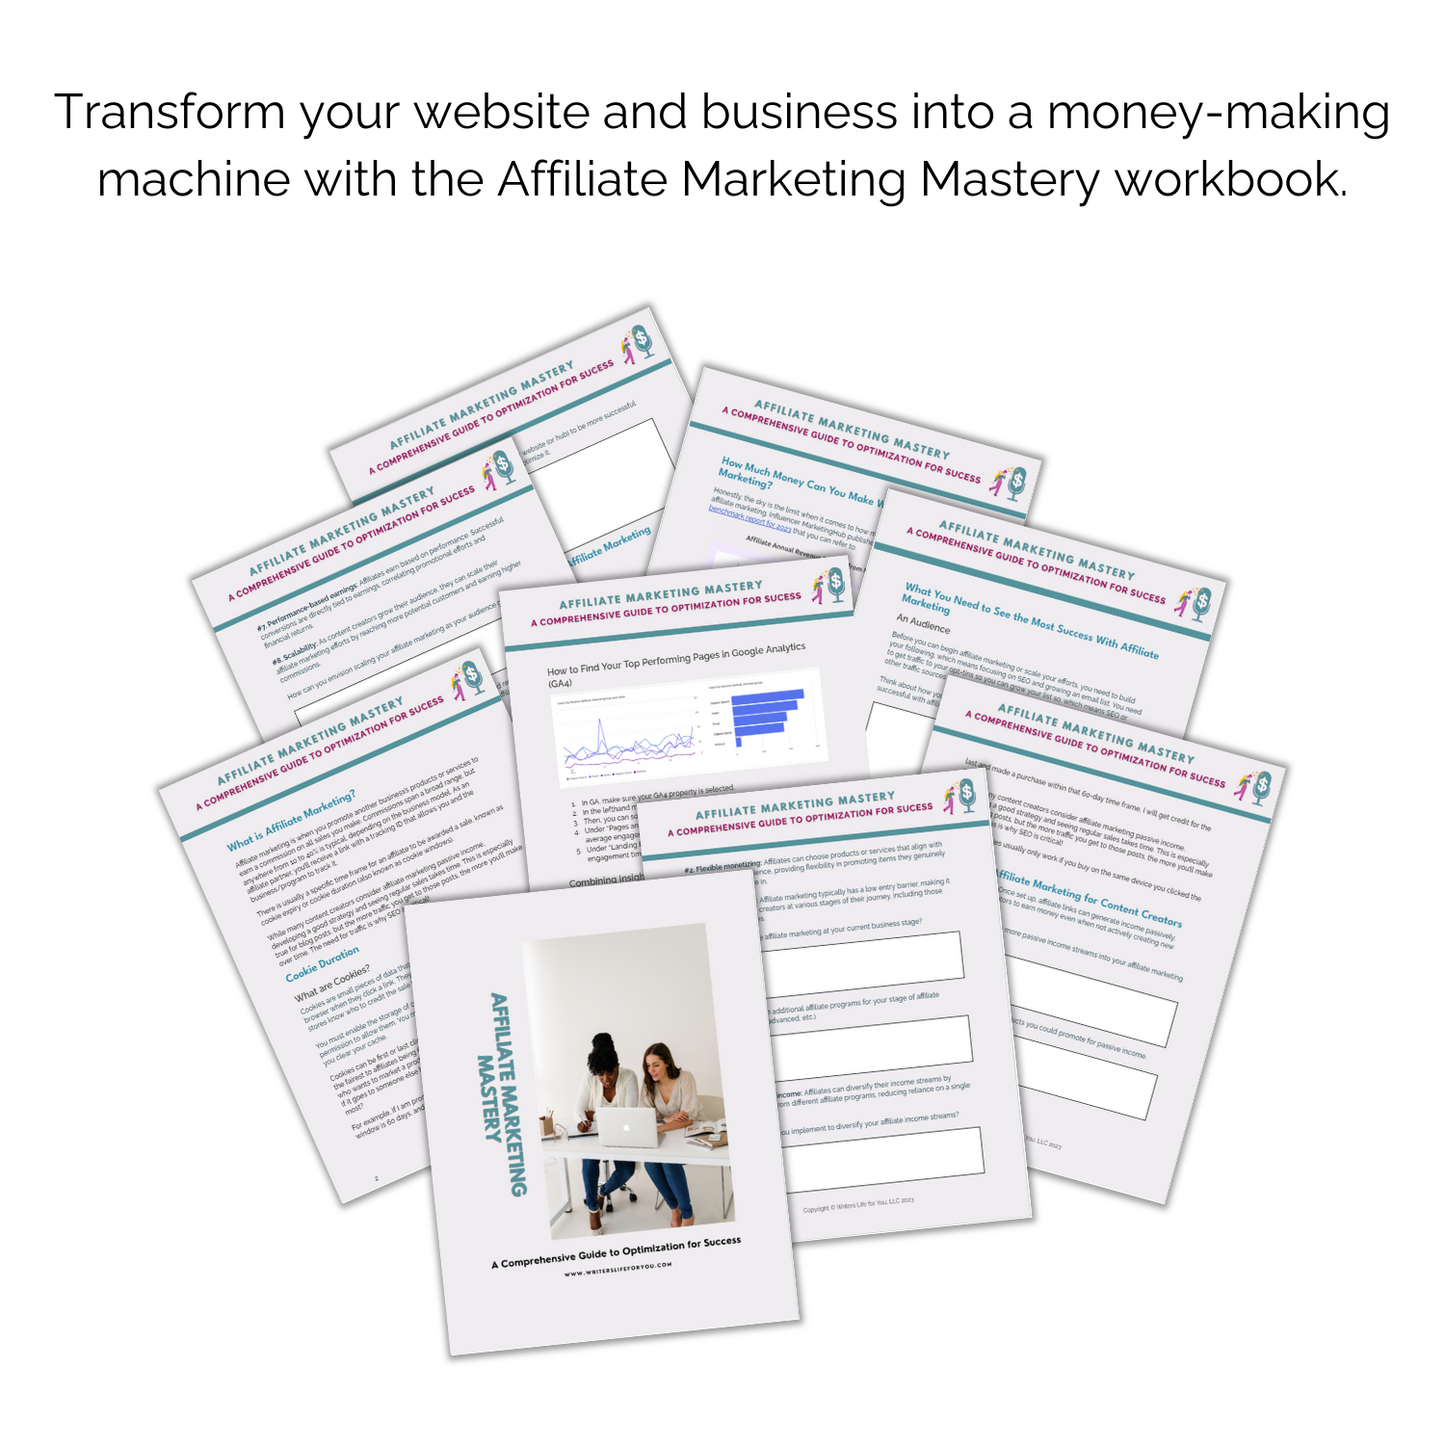 An advertisement for the "Affiliate Marketing Mastery: A Comprehensive Guide to Optimization for Success" workbook from ContentPreneur Biz Shop, featuring an array of workbook pages with charts and texts spread out, and a central image showing two people discussing affiliate marketing strategies over a workbook.